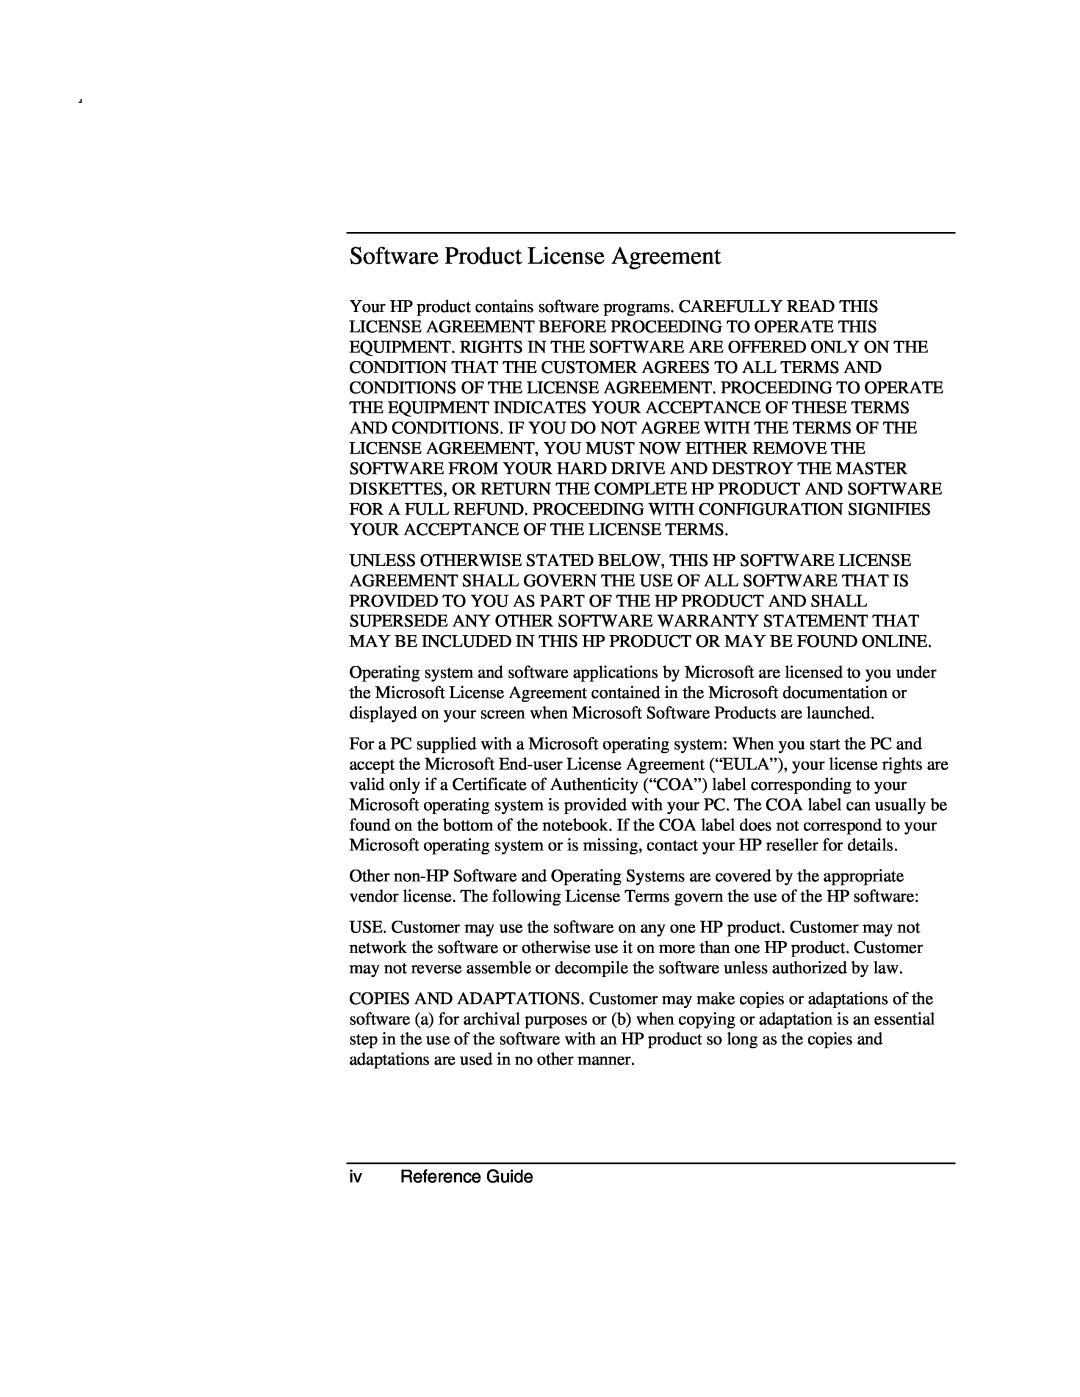 Compaq AMC20493-KT5 manual Software Product License Agreement, iv Reference Guide 